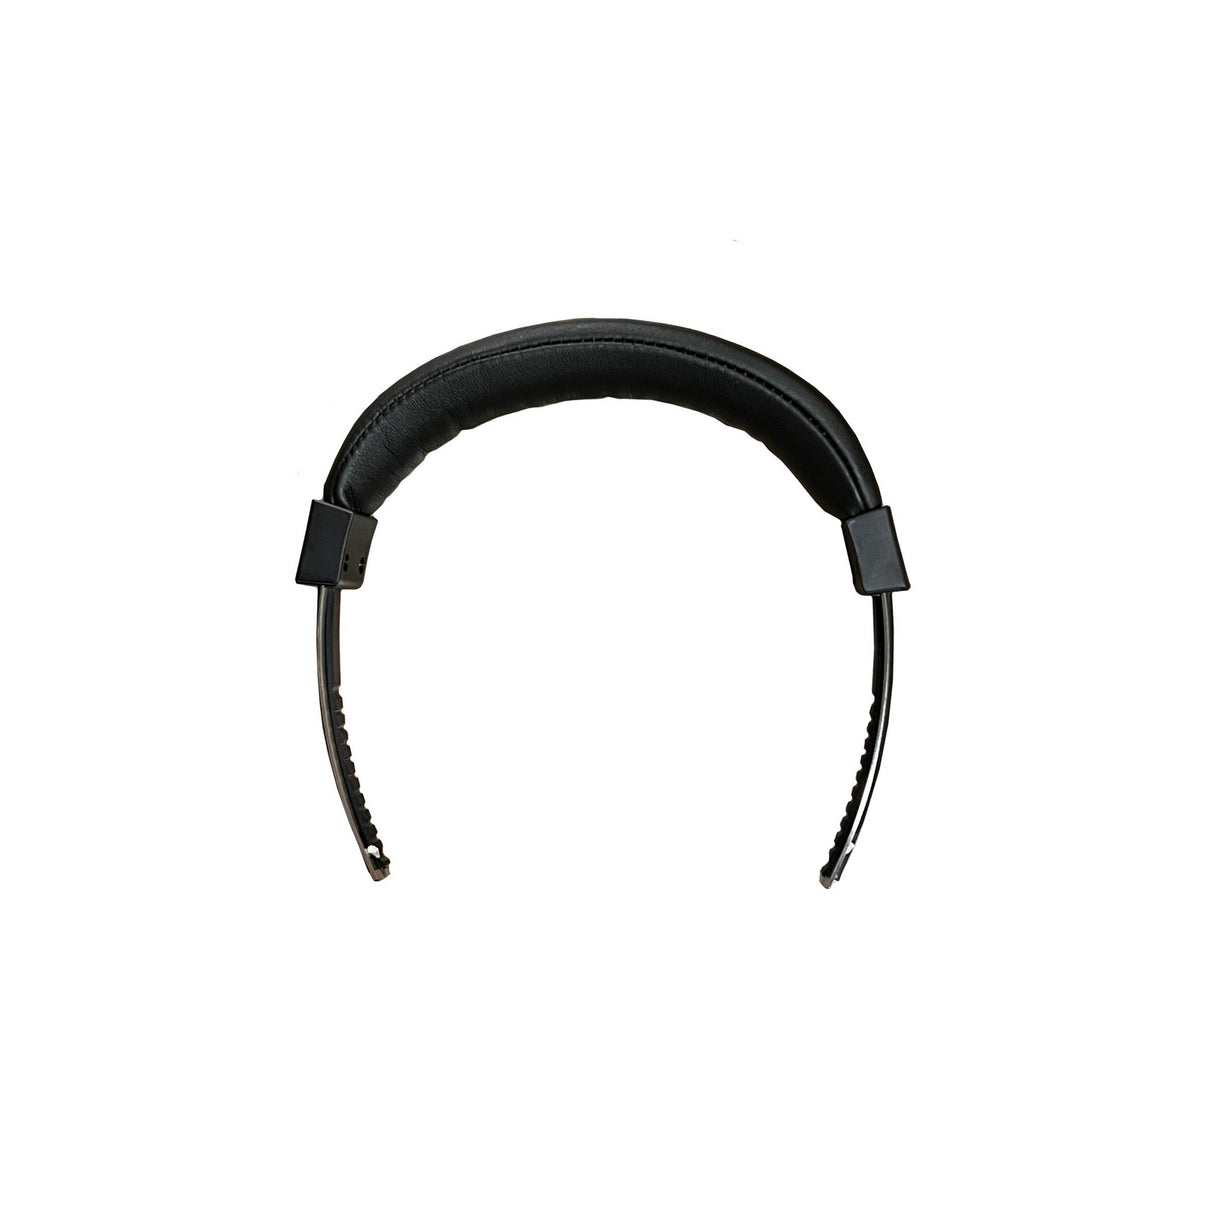 Clear-Com 306G138 CC-110 Head Band Assembly, without Inner Cable